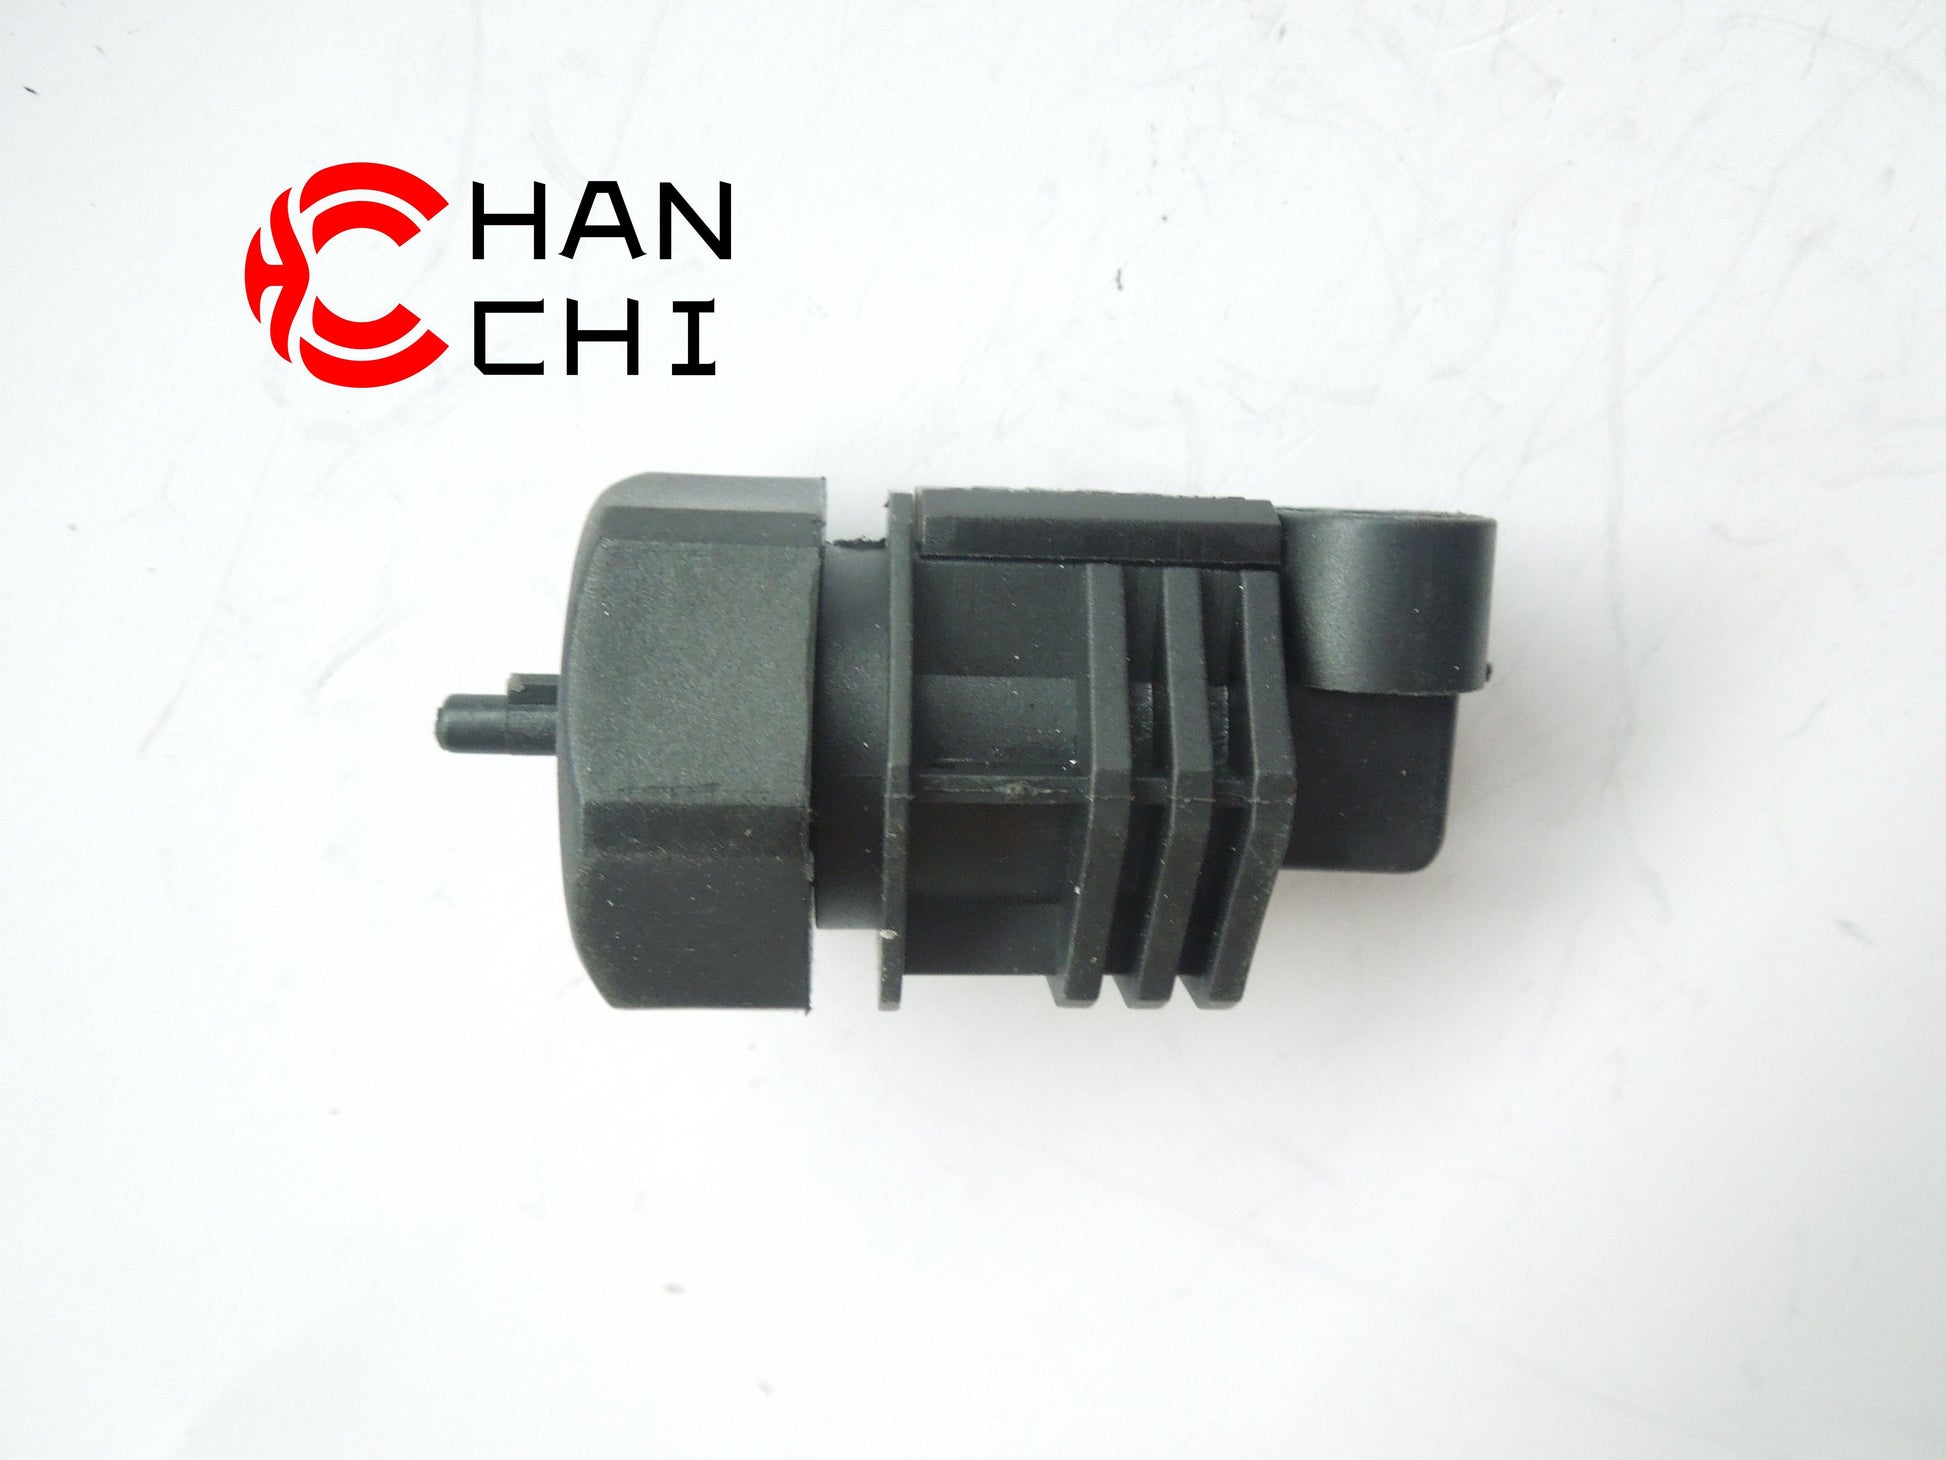 【Description】---☀Welcome to HANCHI☀---✔Good Quality✔Generally Applicability✔Competitive PriceEnjoy your shopping time↖（^ω^）↗【Features】Brand-New with High Quality for the Aftermarket.Totally mathced your need.**Stable Quality**High Precision**Easy Installation**【Specification】OEM: C03054-19 Speed Meter SensorMaterial: metalColor: black Origin: Made in ChinaWeight: 100g【Packing List】1* Speed Sensor 【More Service】 We can provide OEM service We can Be your one-step solution for Auto Parts We can pro